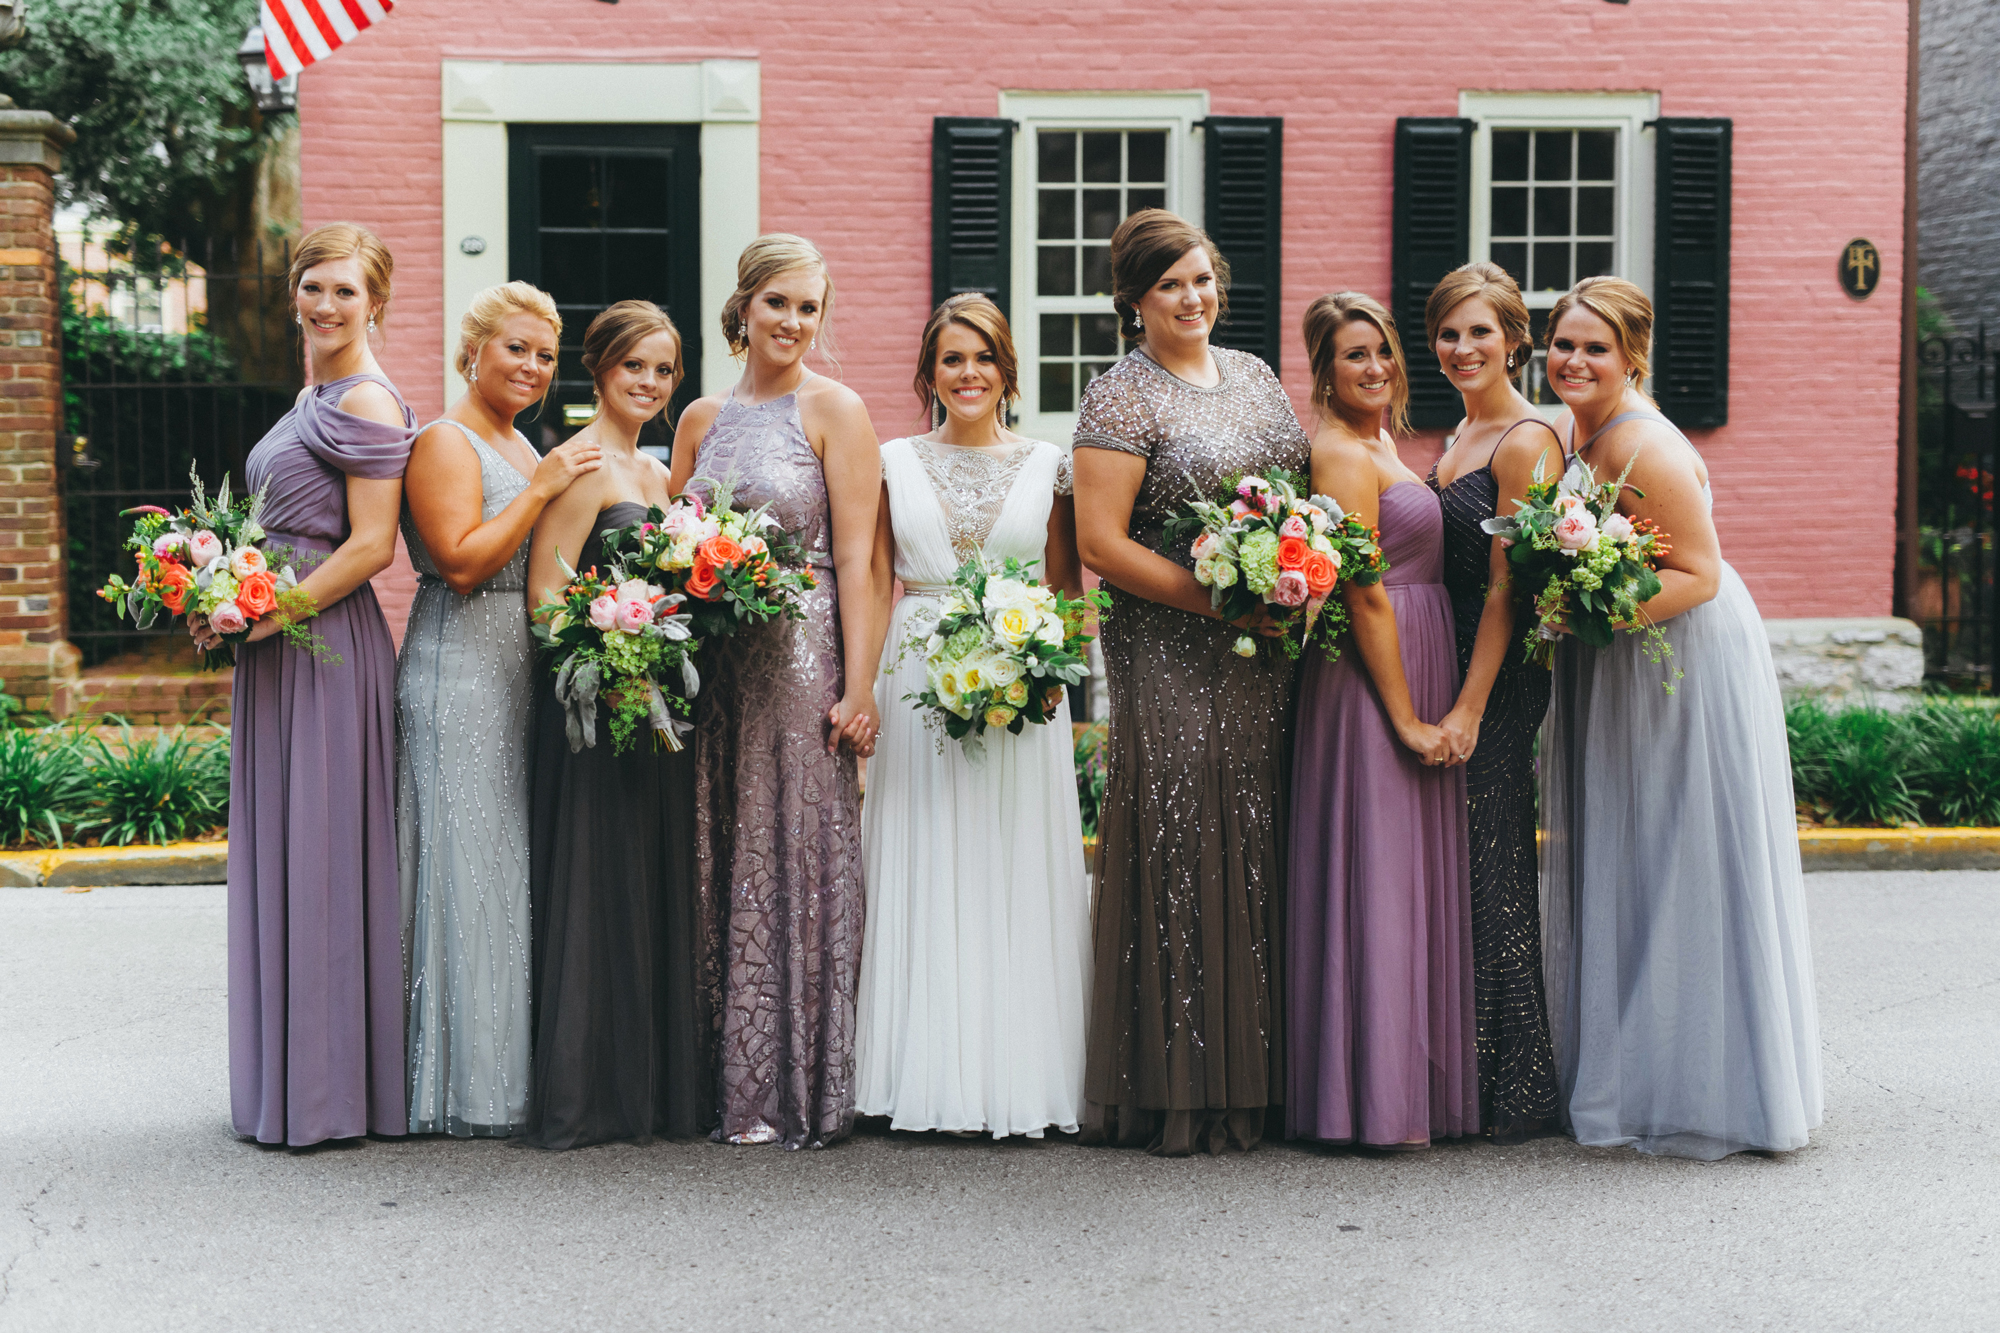 How to Mix and Match Bridesmaid Dresses